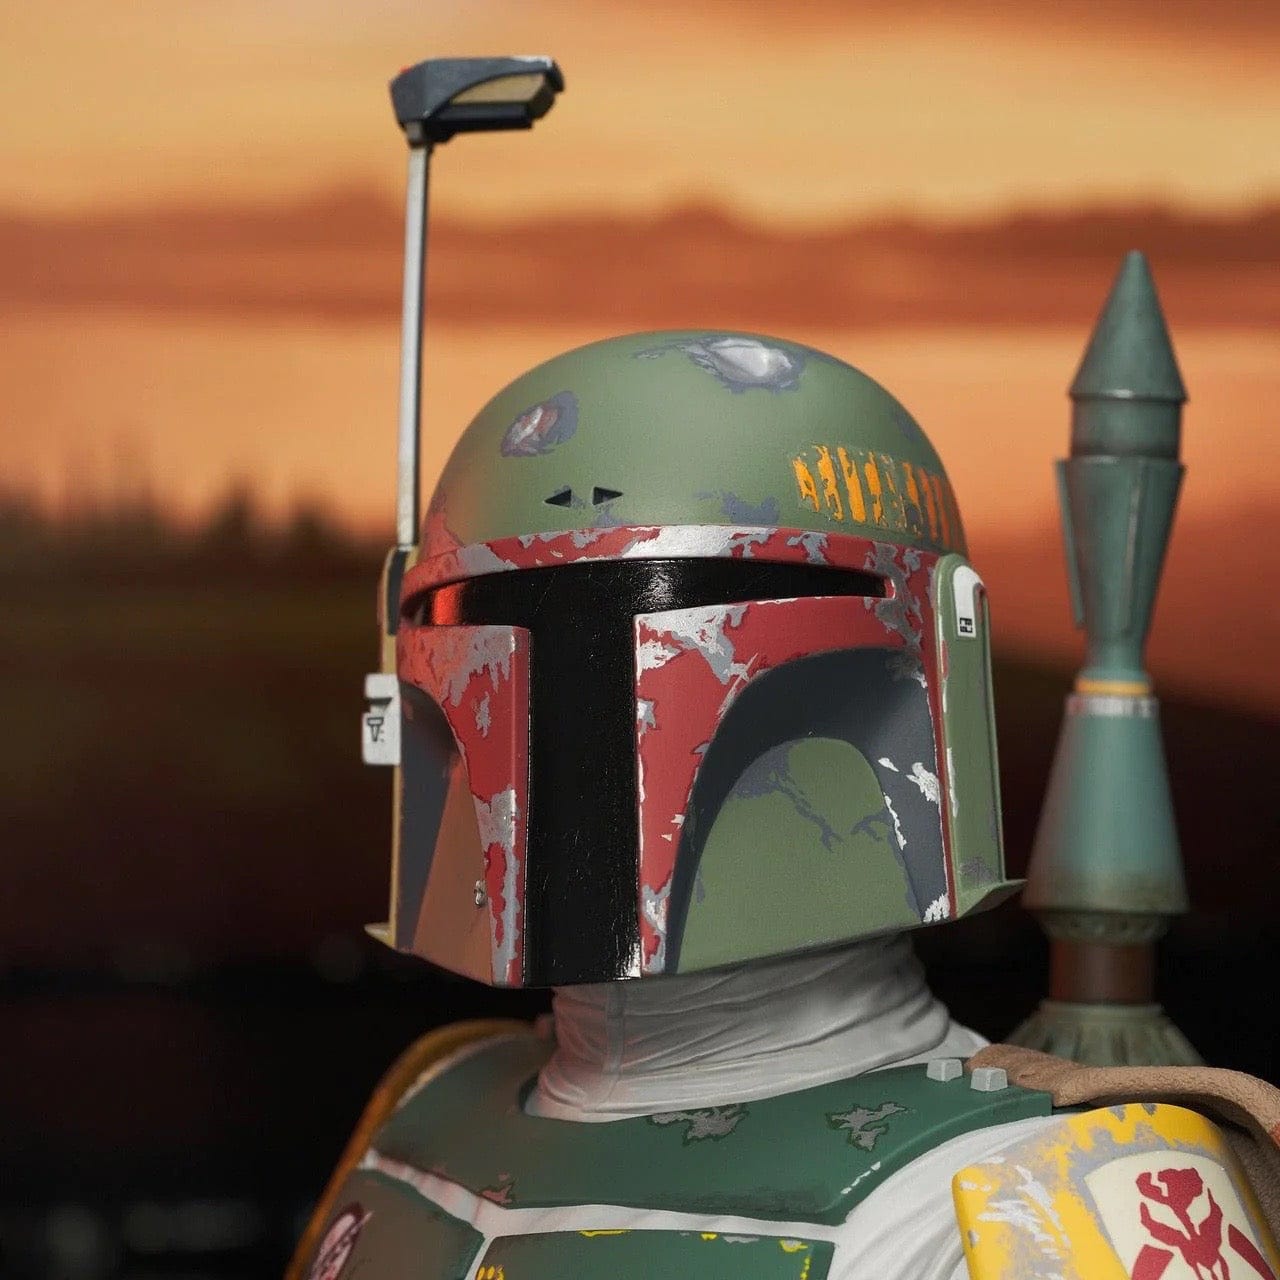 Diamond Select Toys Legends in 3-Dimensions Star Wars: The Empire Strikes Back Boba Fett 1:2 Scale Bust